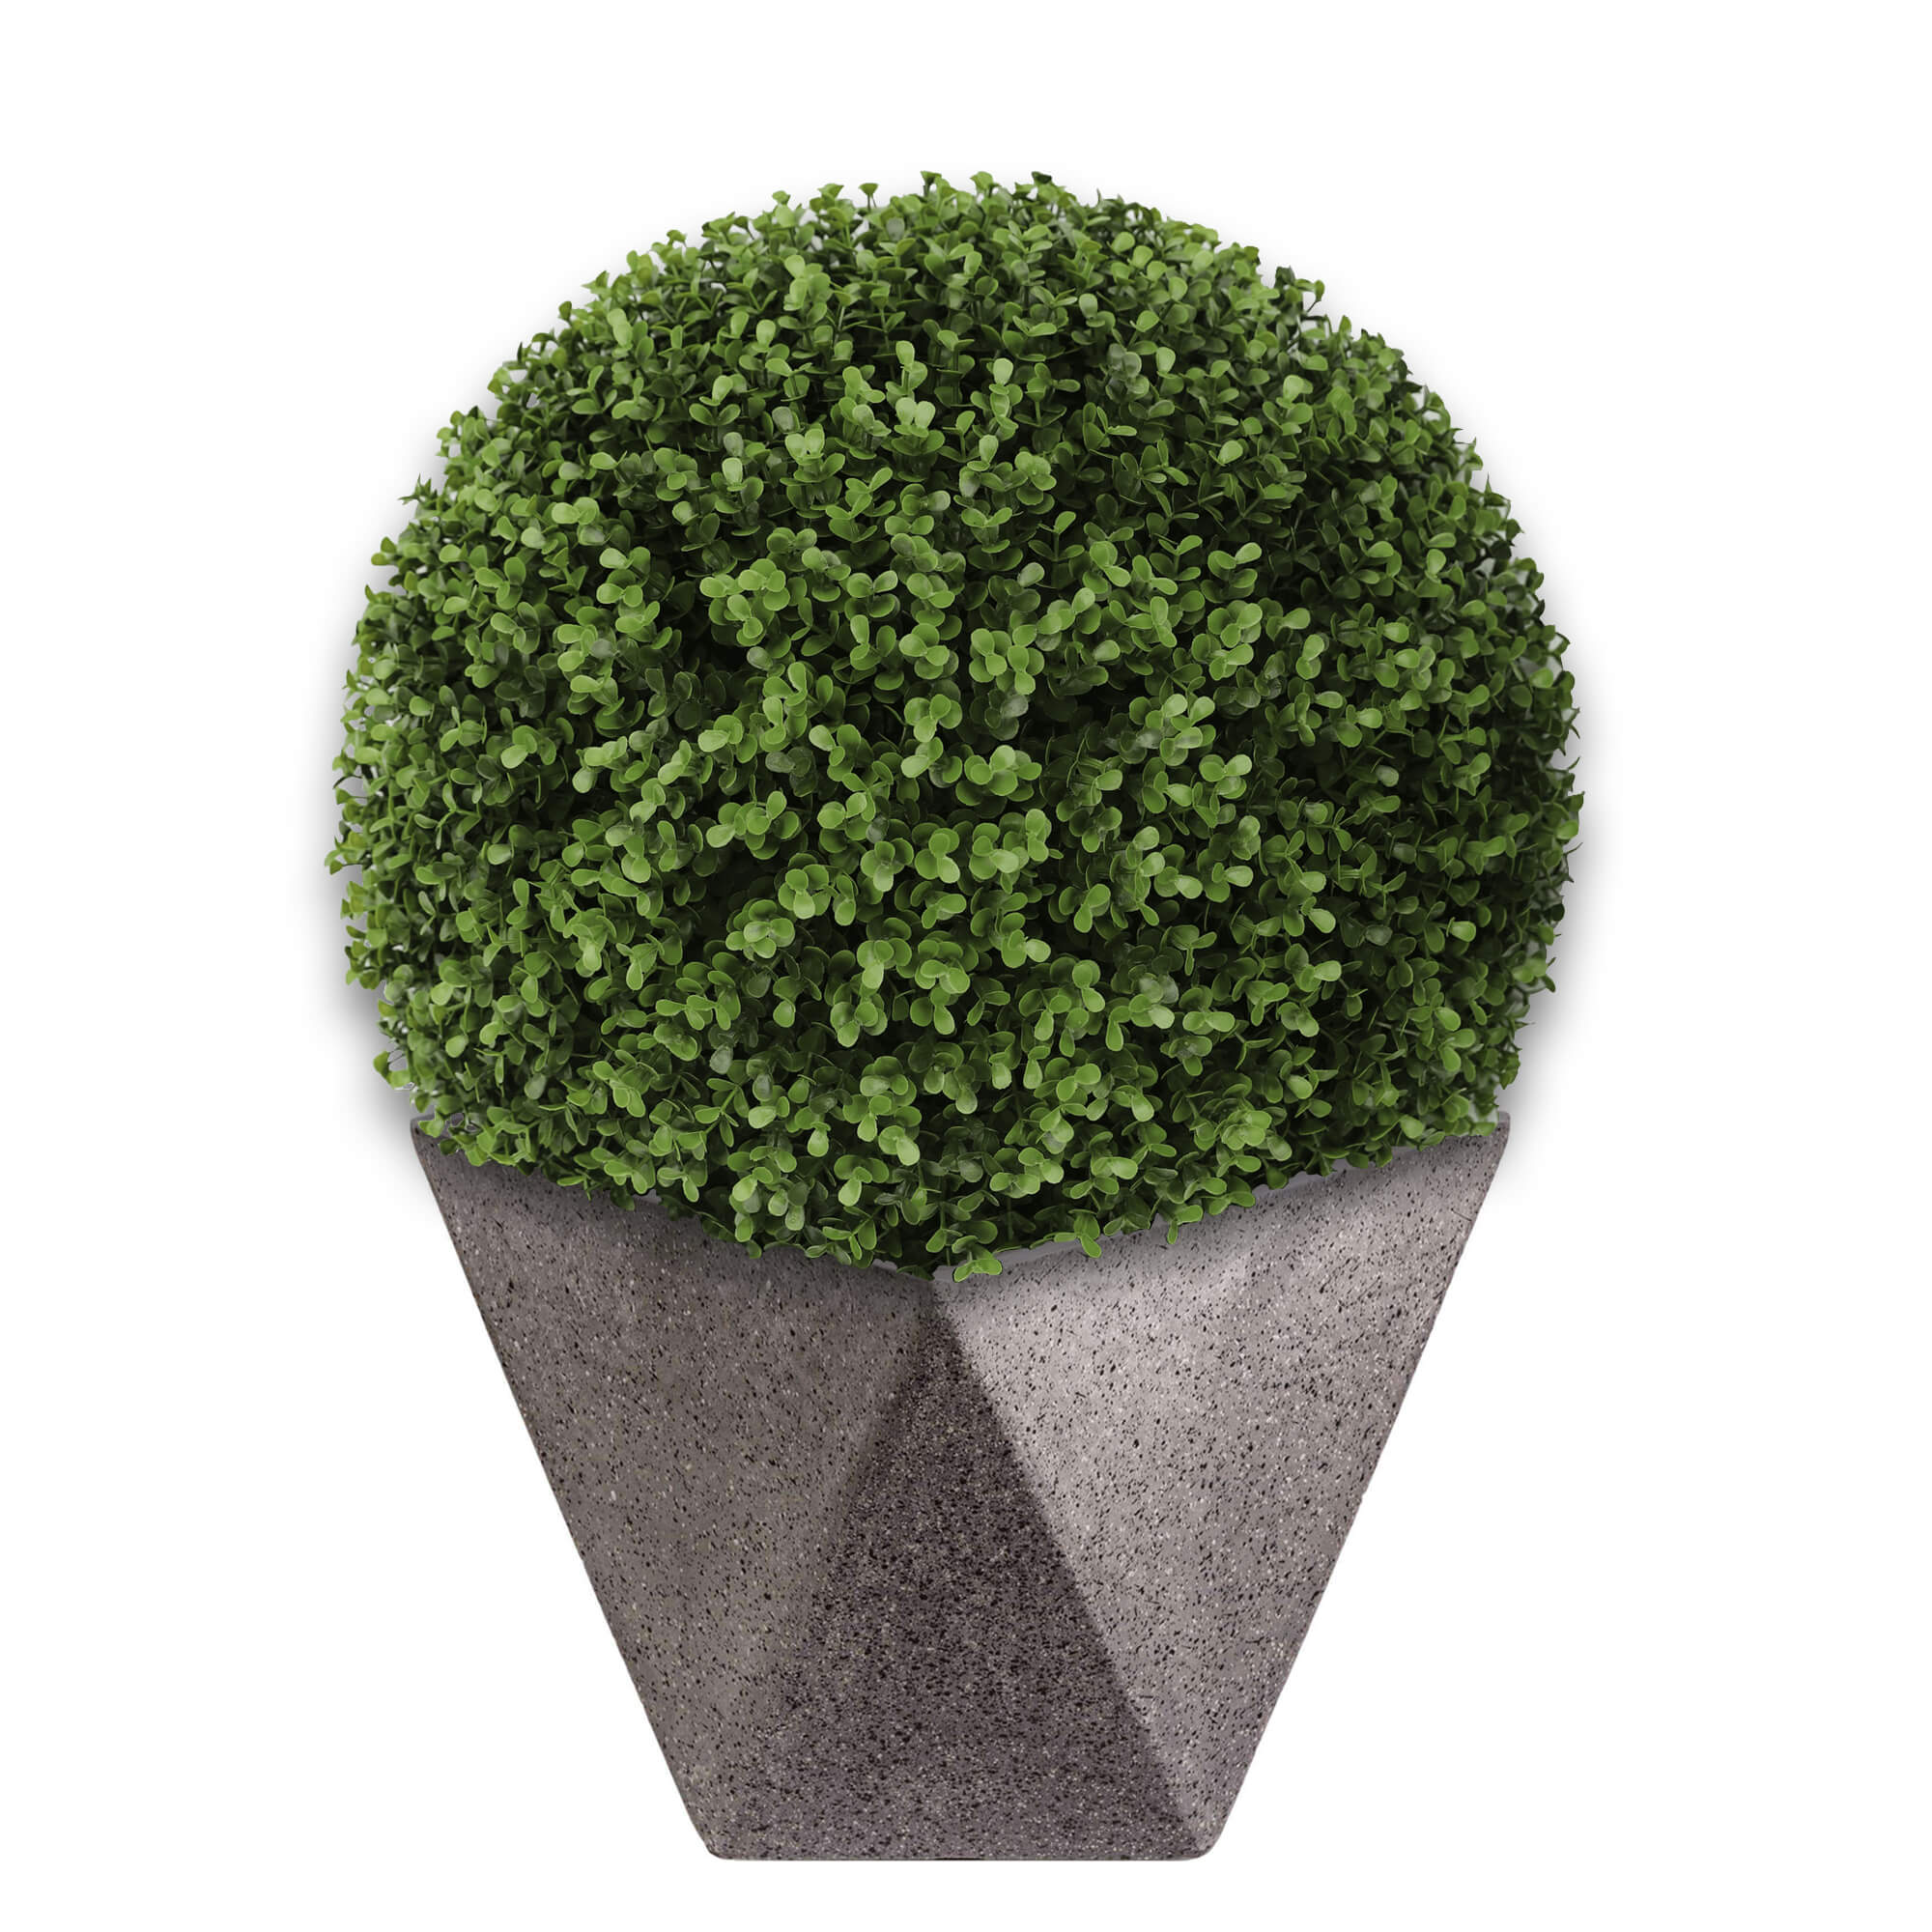 Large Artificial Topiary Ball Natural Buxus 48cm UV Resistant - Designer Vertical Gardens Topiary Ball